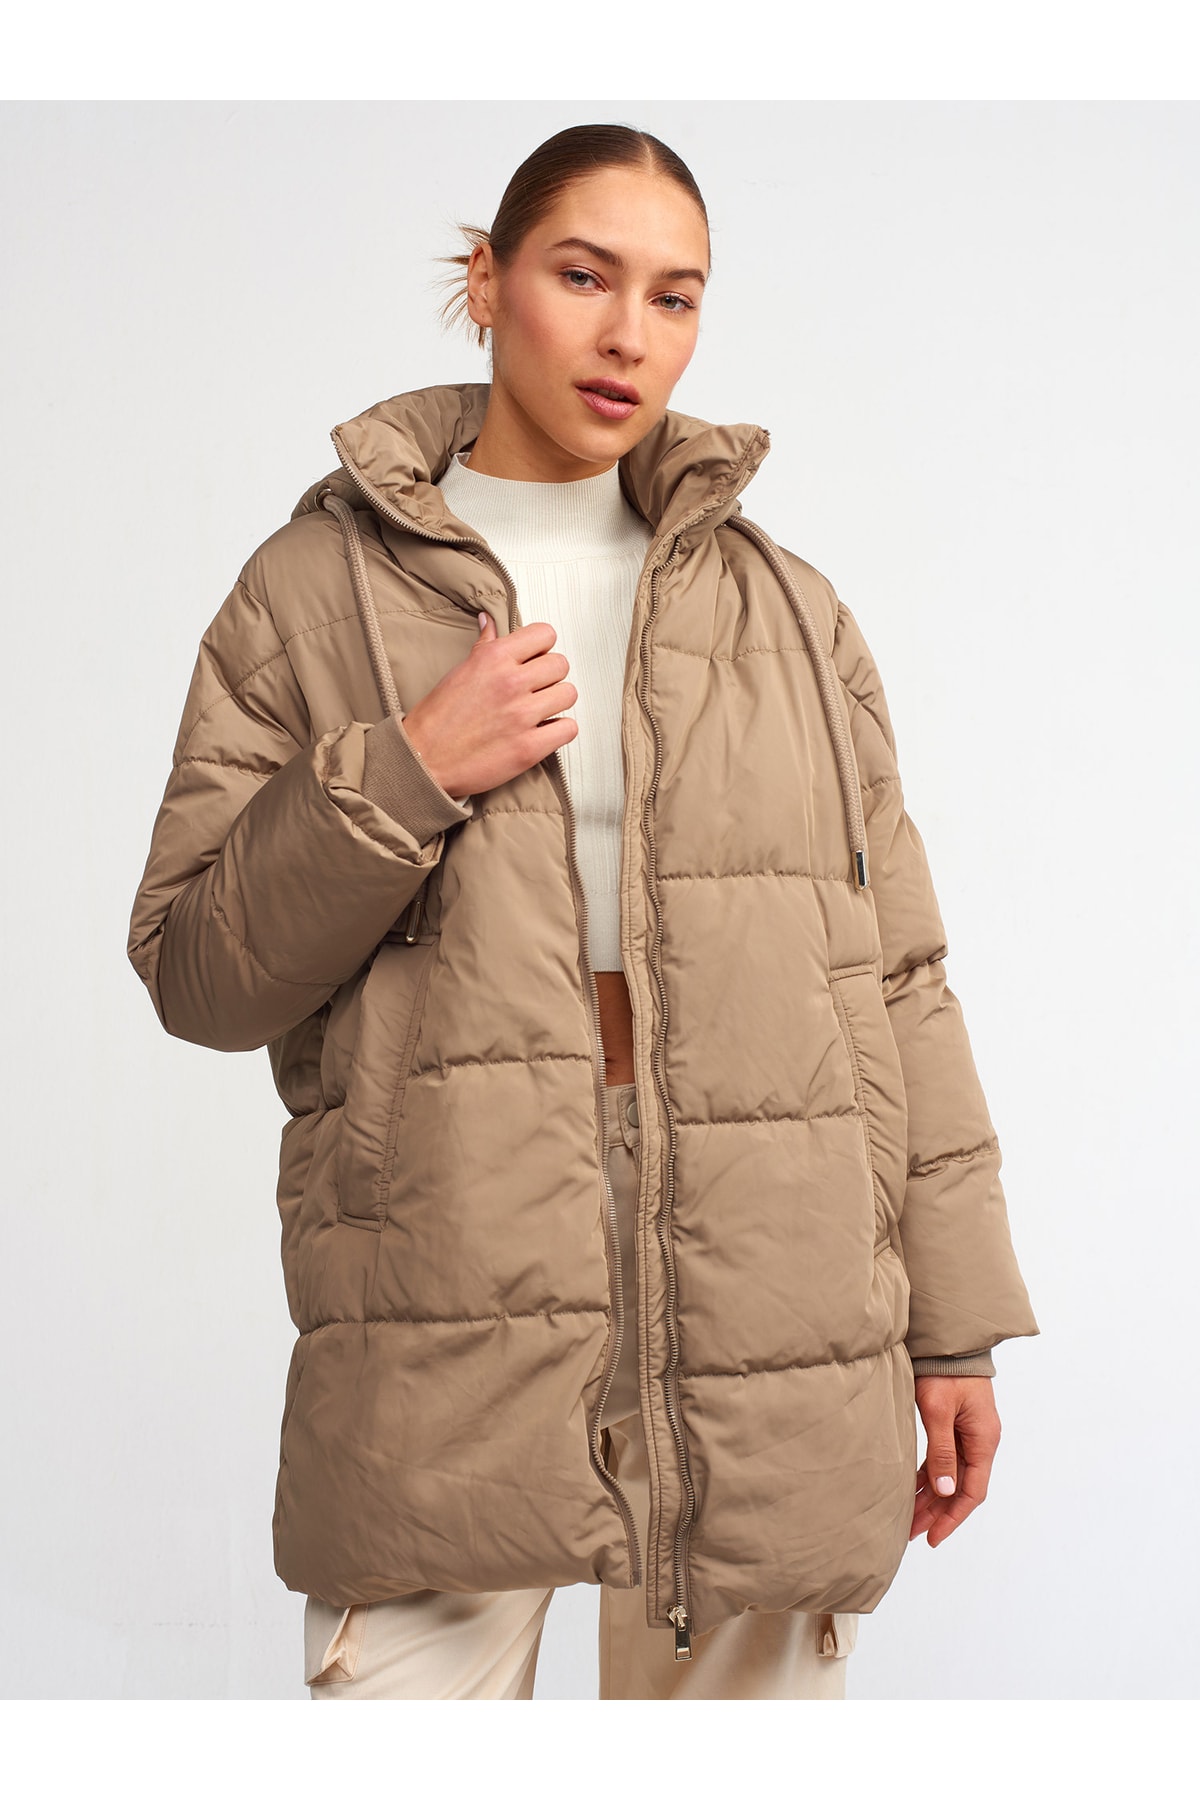 Dilvin 60325 Hooded Inflatable Coat-mink